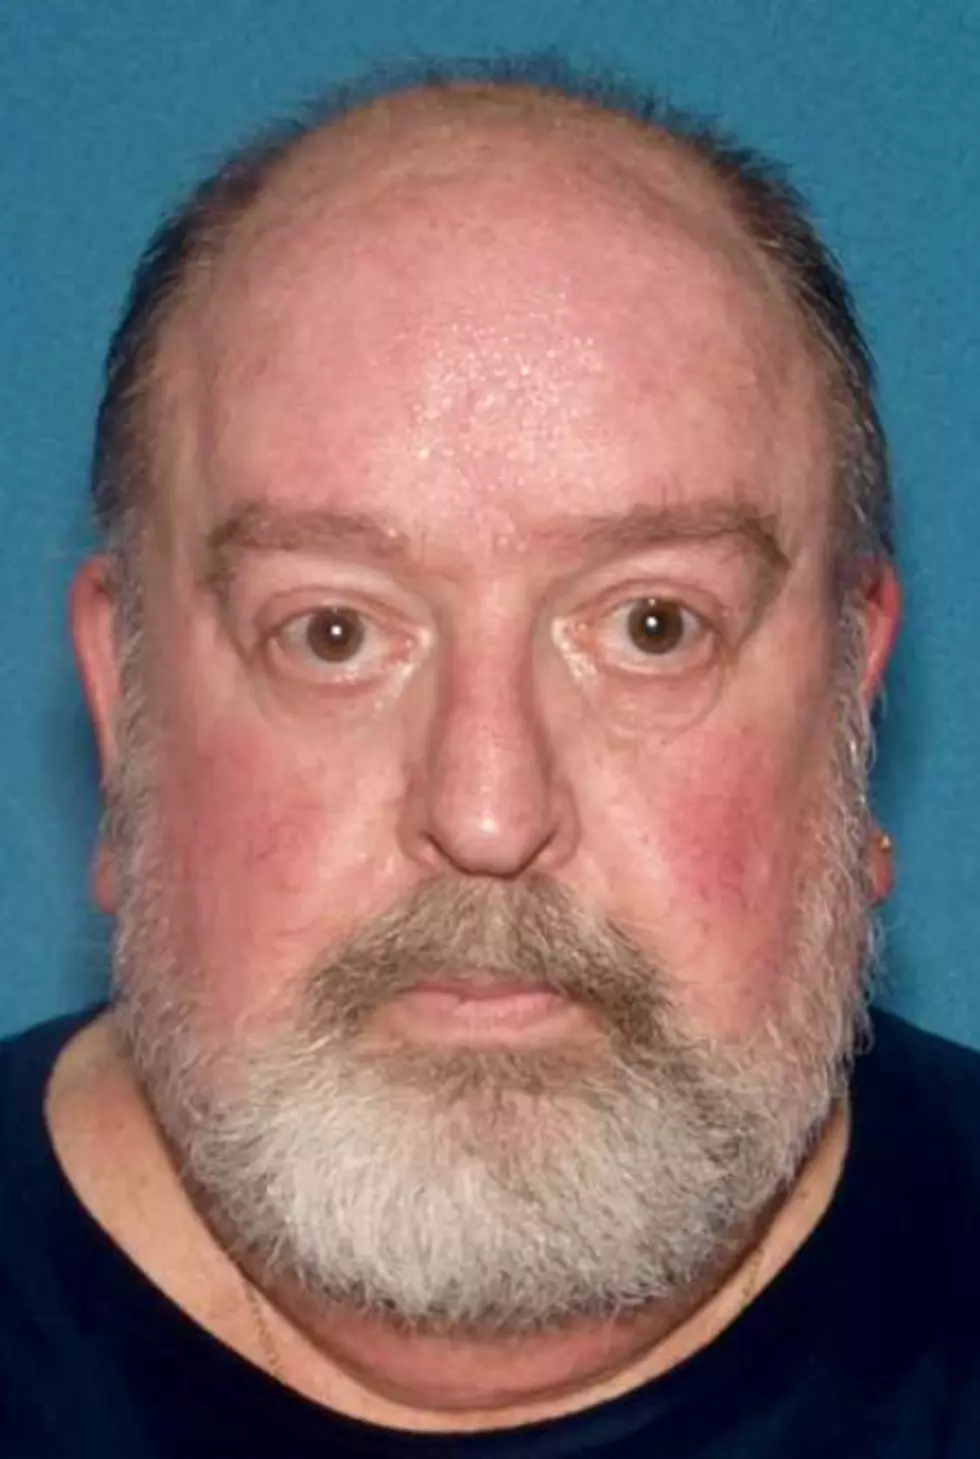 Former Treasurer of Lakeside Rod and Gun Club in Plumsted, NJ charged with embezzlement